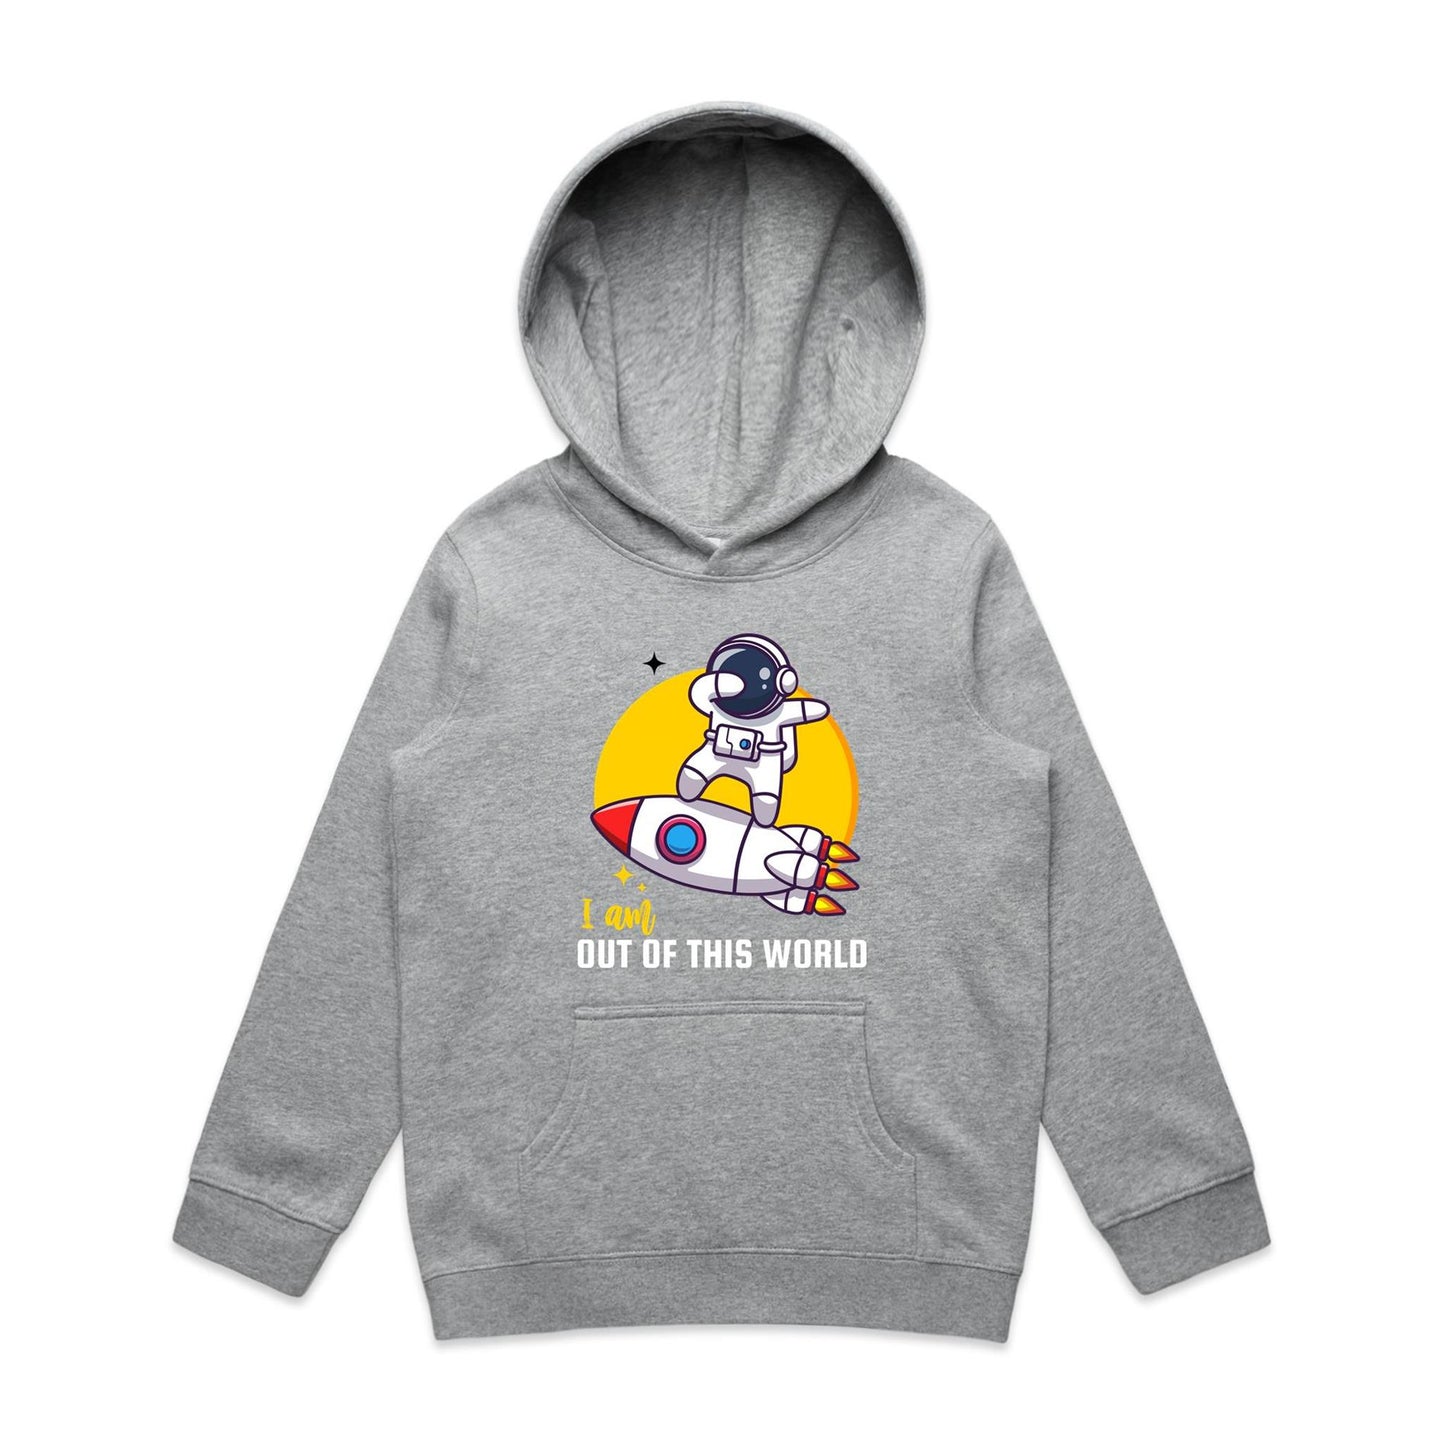 I Am Out Of This World, Astronaut - Youth Supply Hood Grey Marle Kids Hoodie Sci Fi